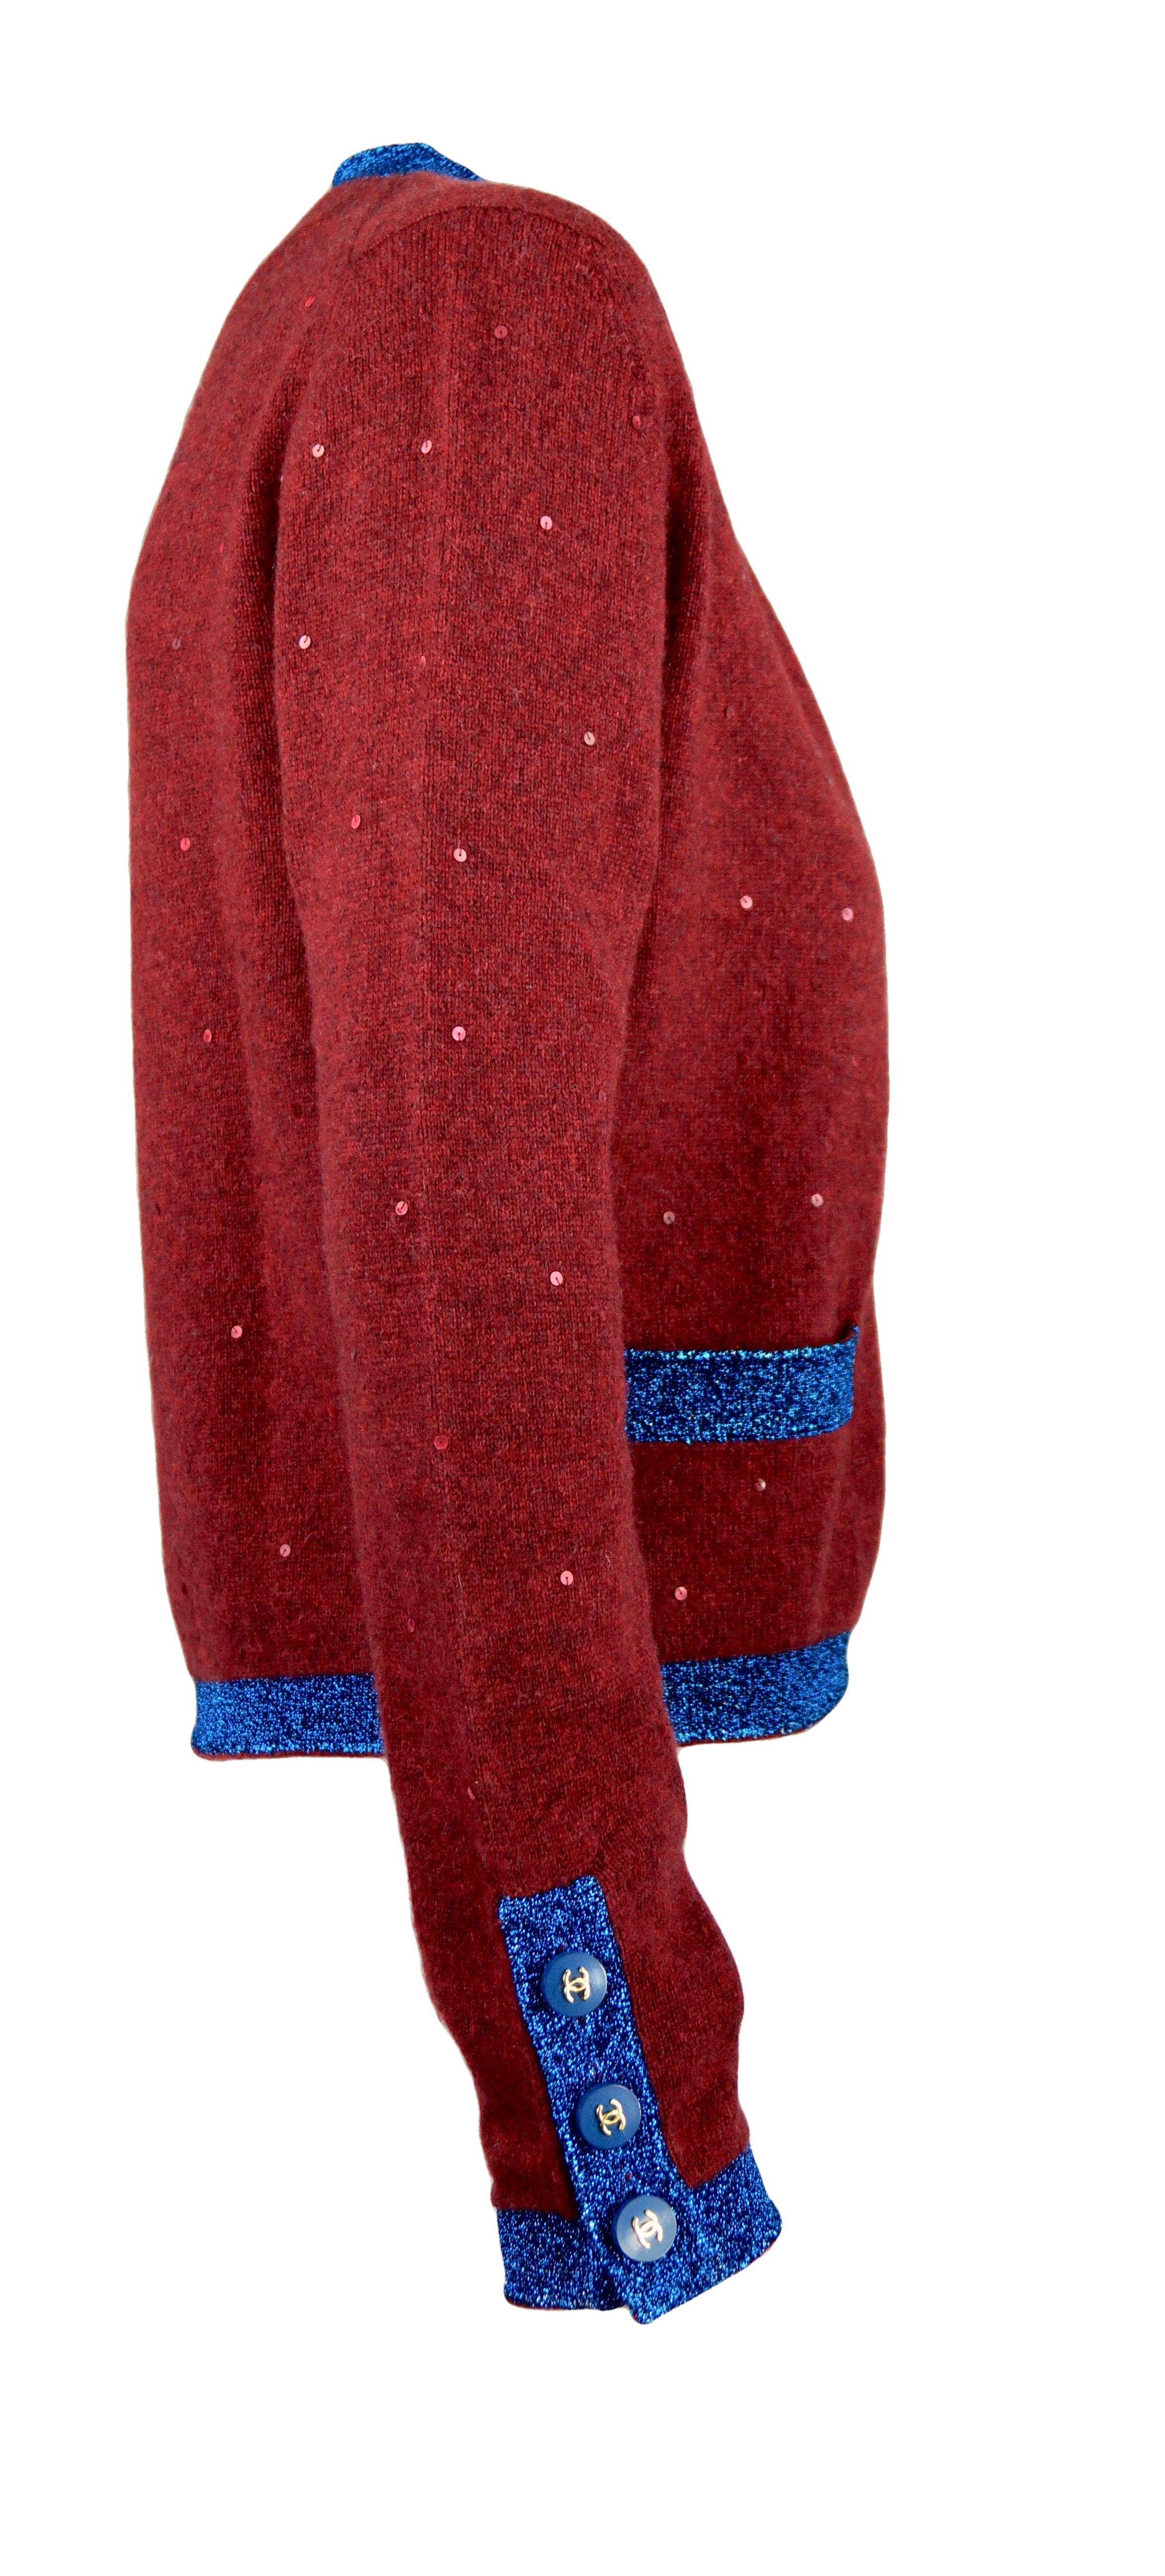 
Chanel twin set  F/W 1996 collection
Cardigan and shirt 1/2 sleeves in rust red cashmere with micro sequins. Bright electric blue gaskets. Logo buttons.
Size FR 40
Made in the United Kingdom
100% cashmere
Insert: 65% viscose 35%